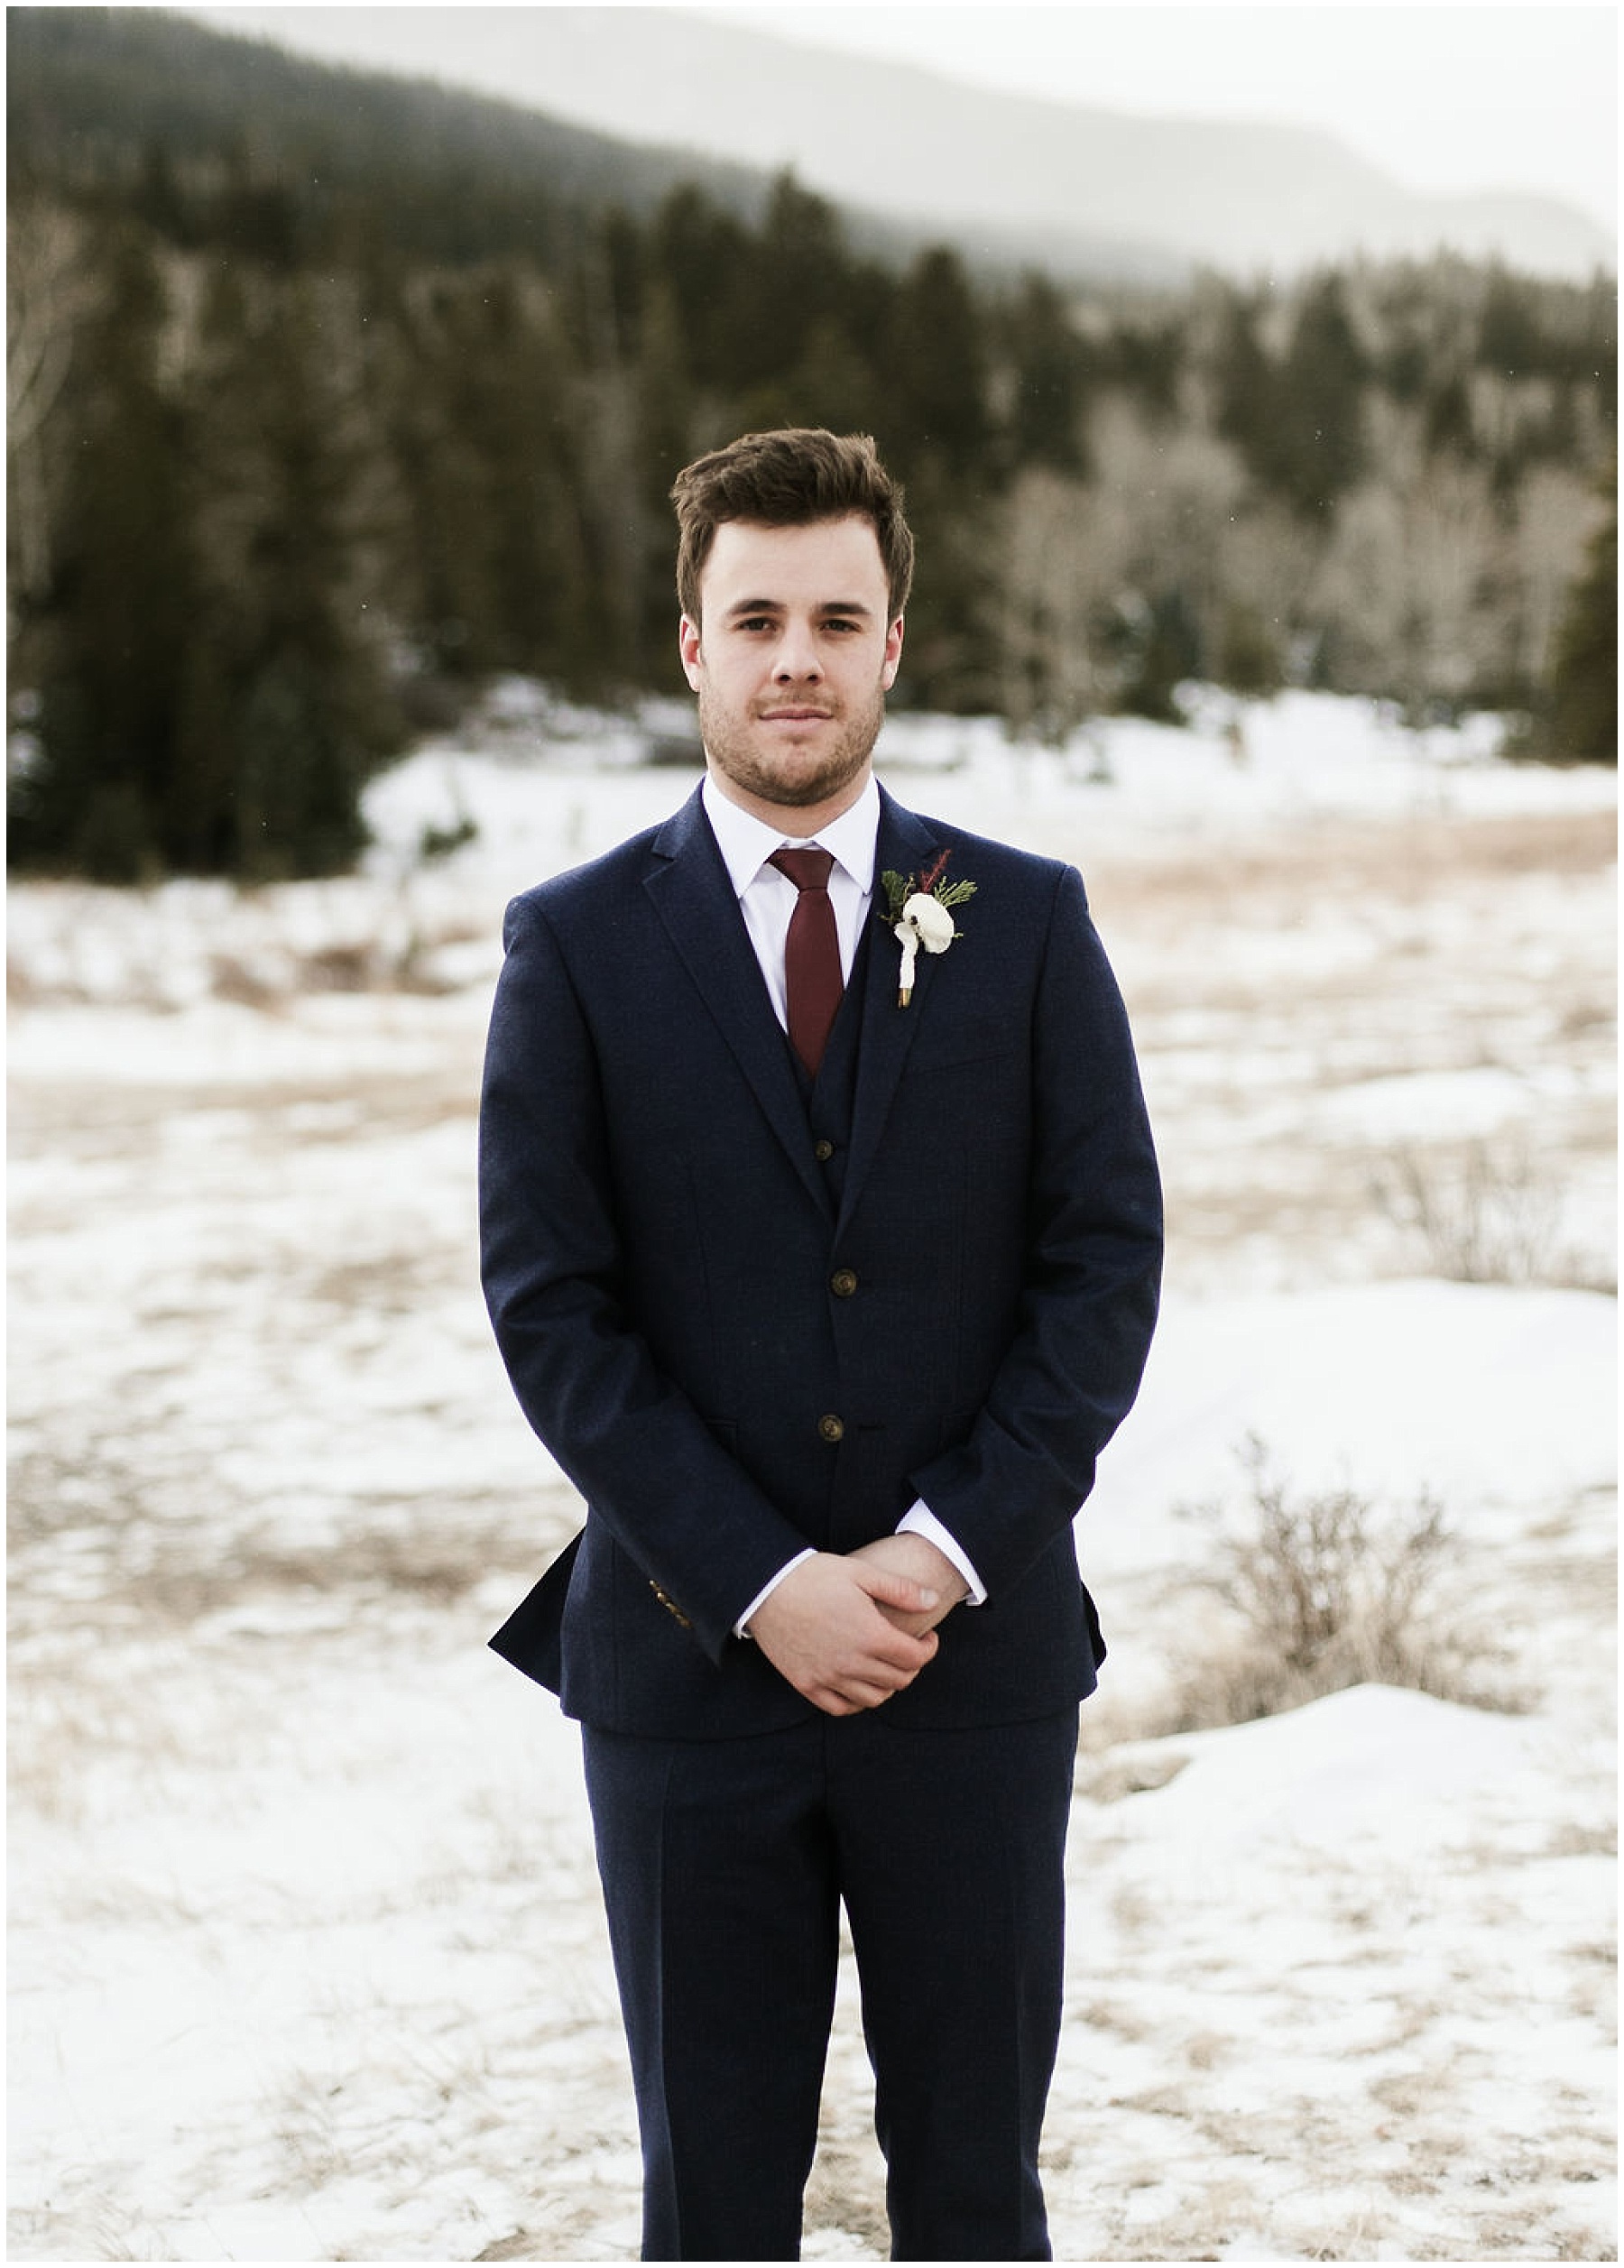 Katesalleyphotography-233_Haley and Dan get married in Estes Park.jpg